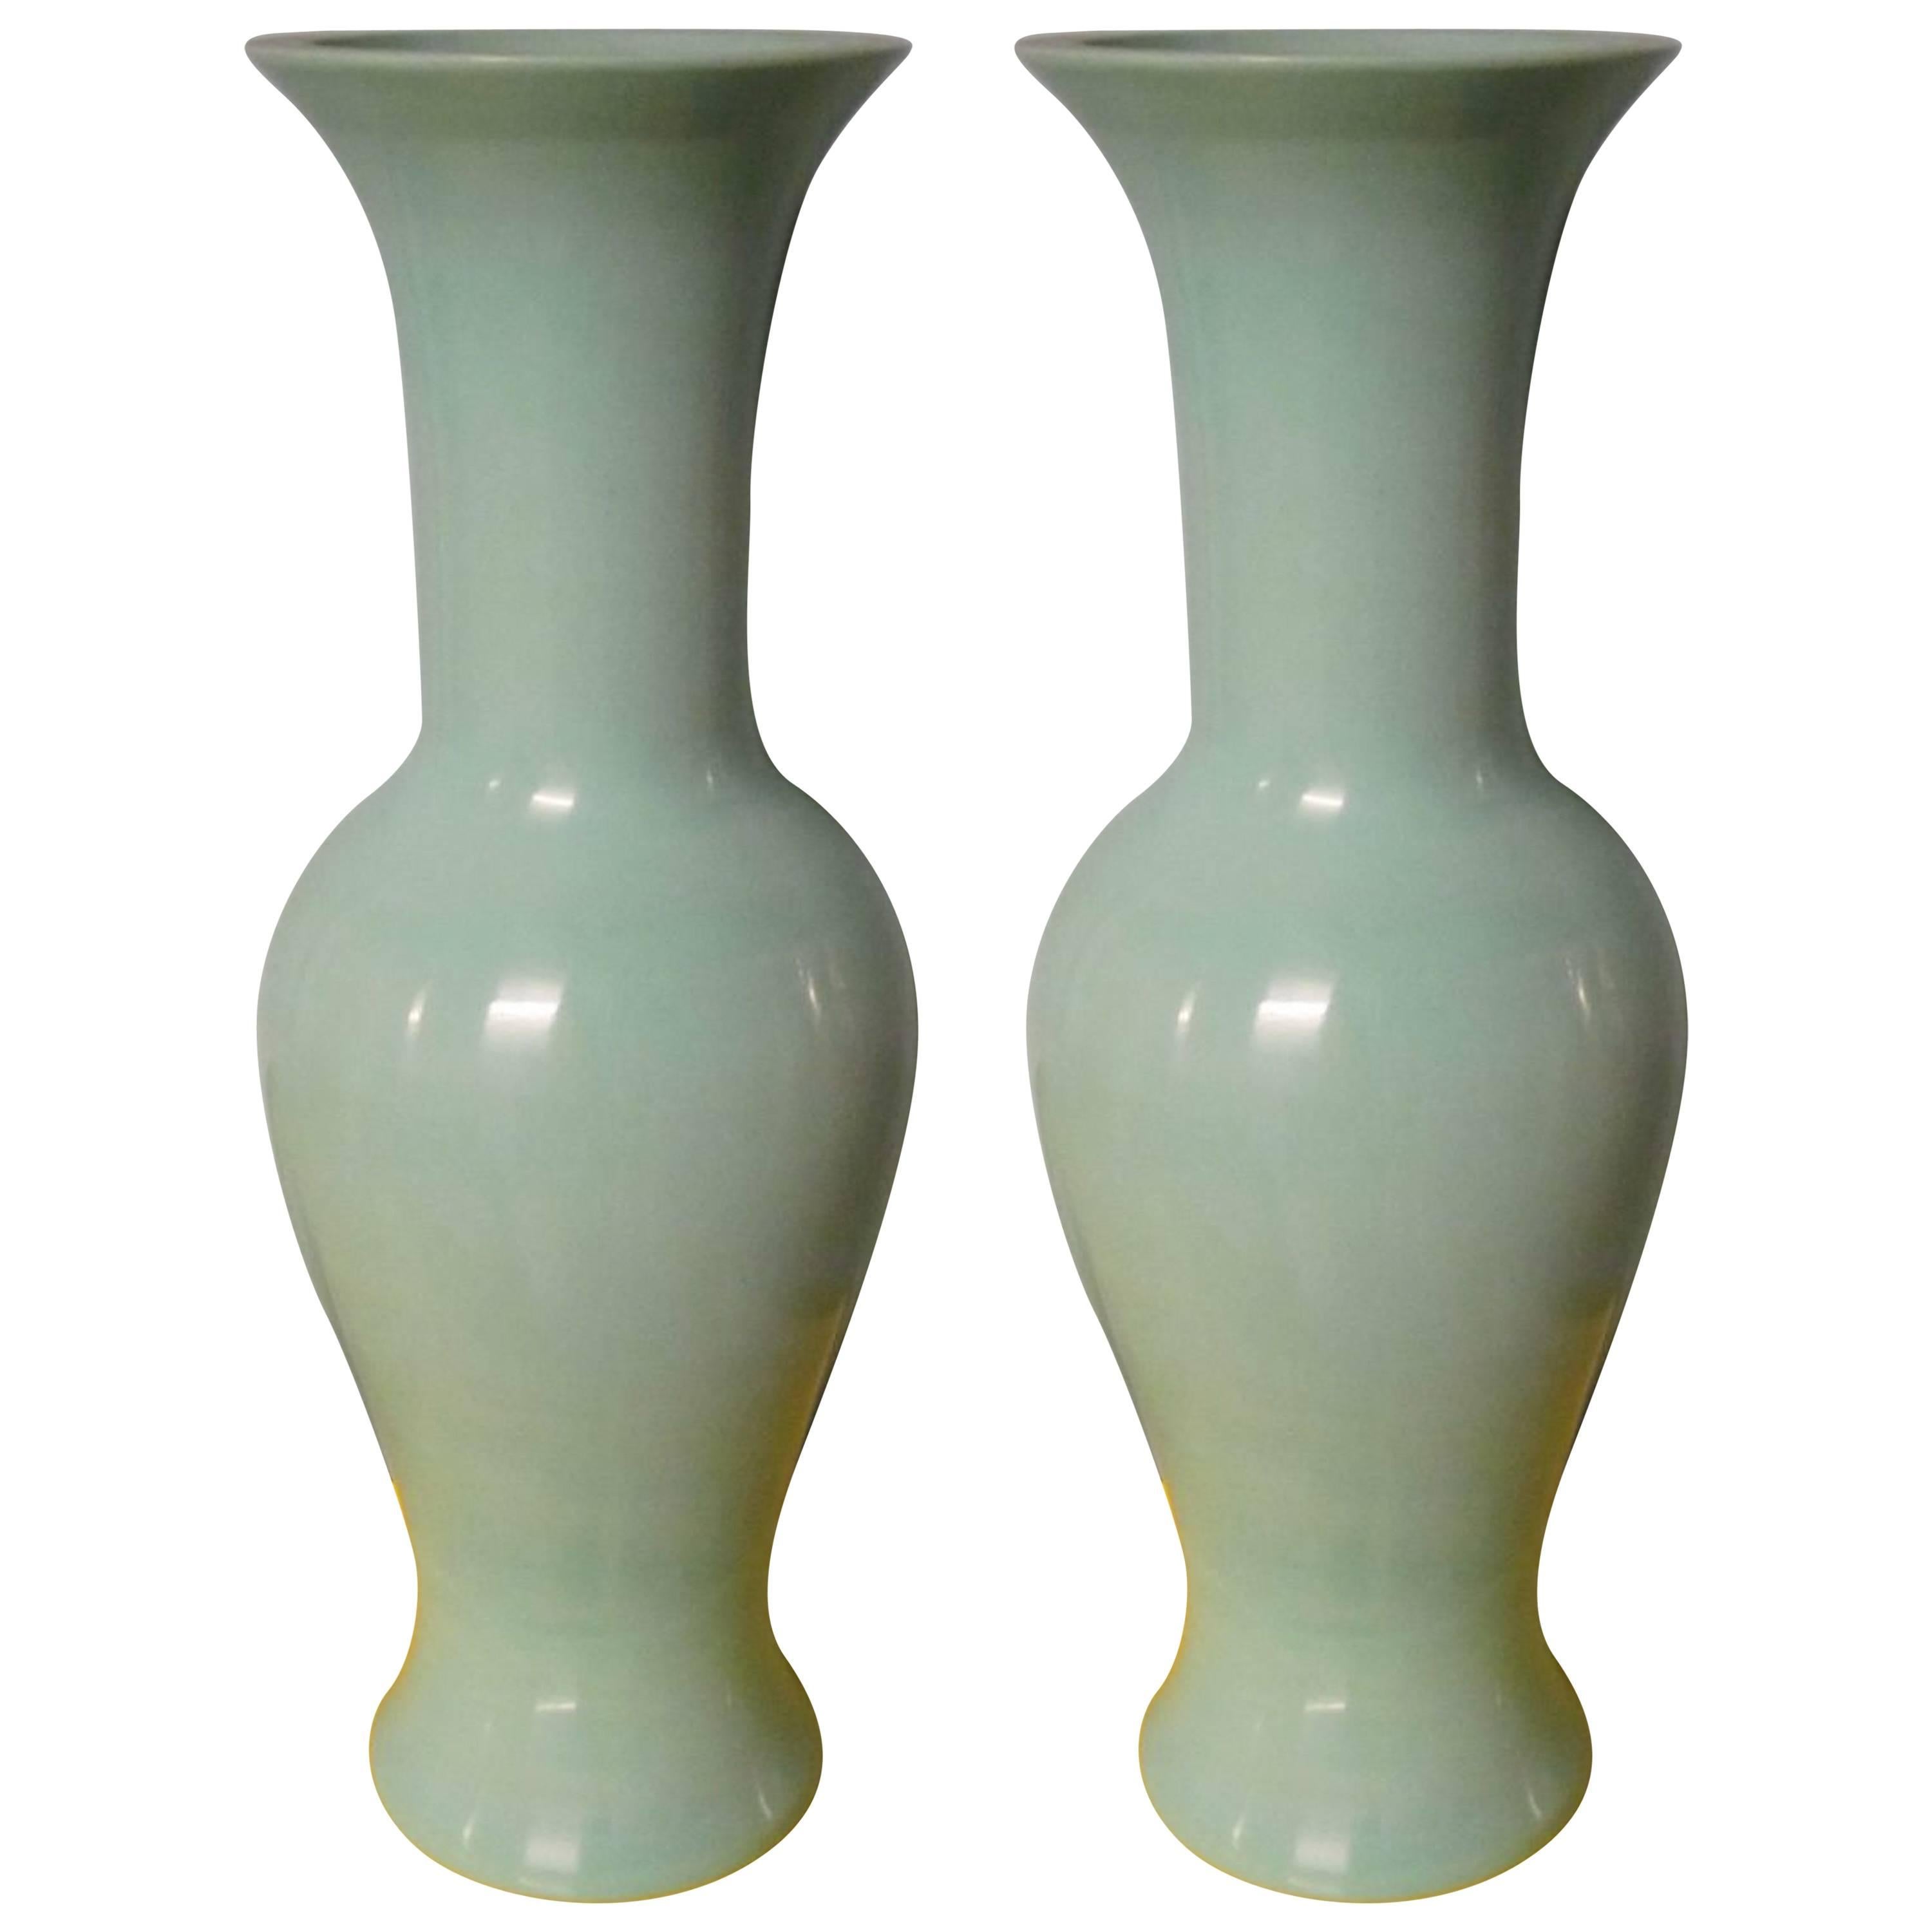 Pair of Turquoise Glass Vases, China, Contemporary